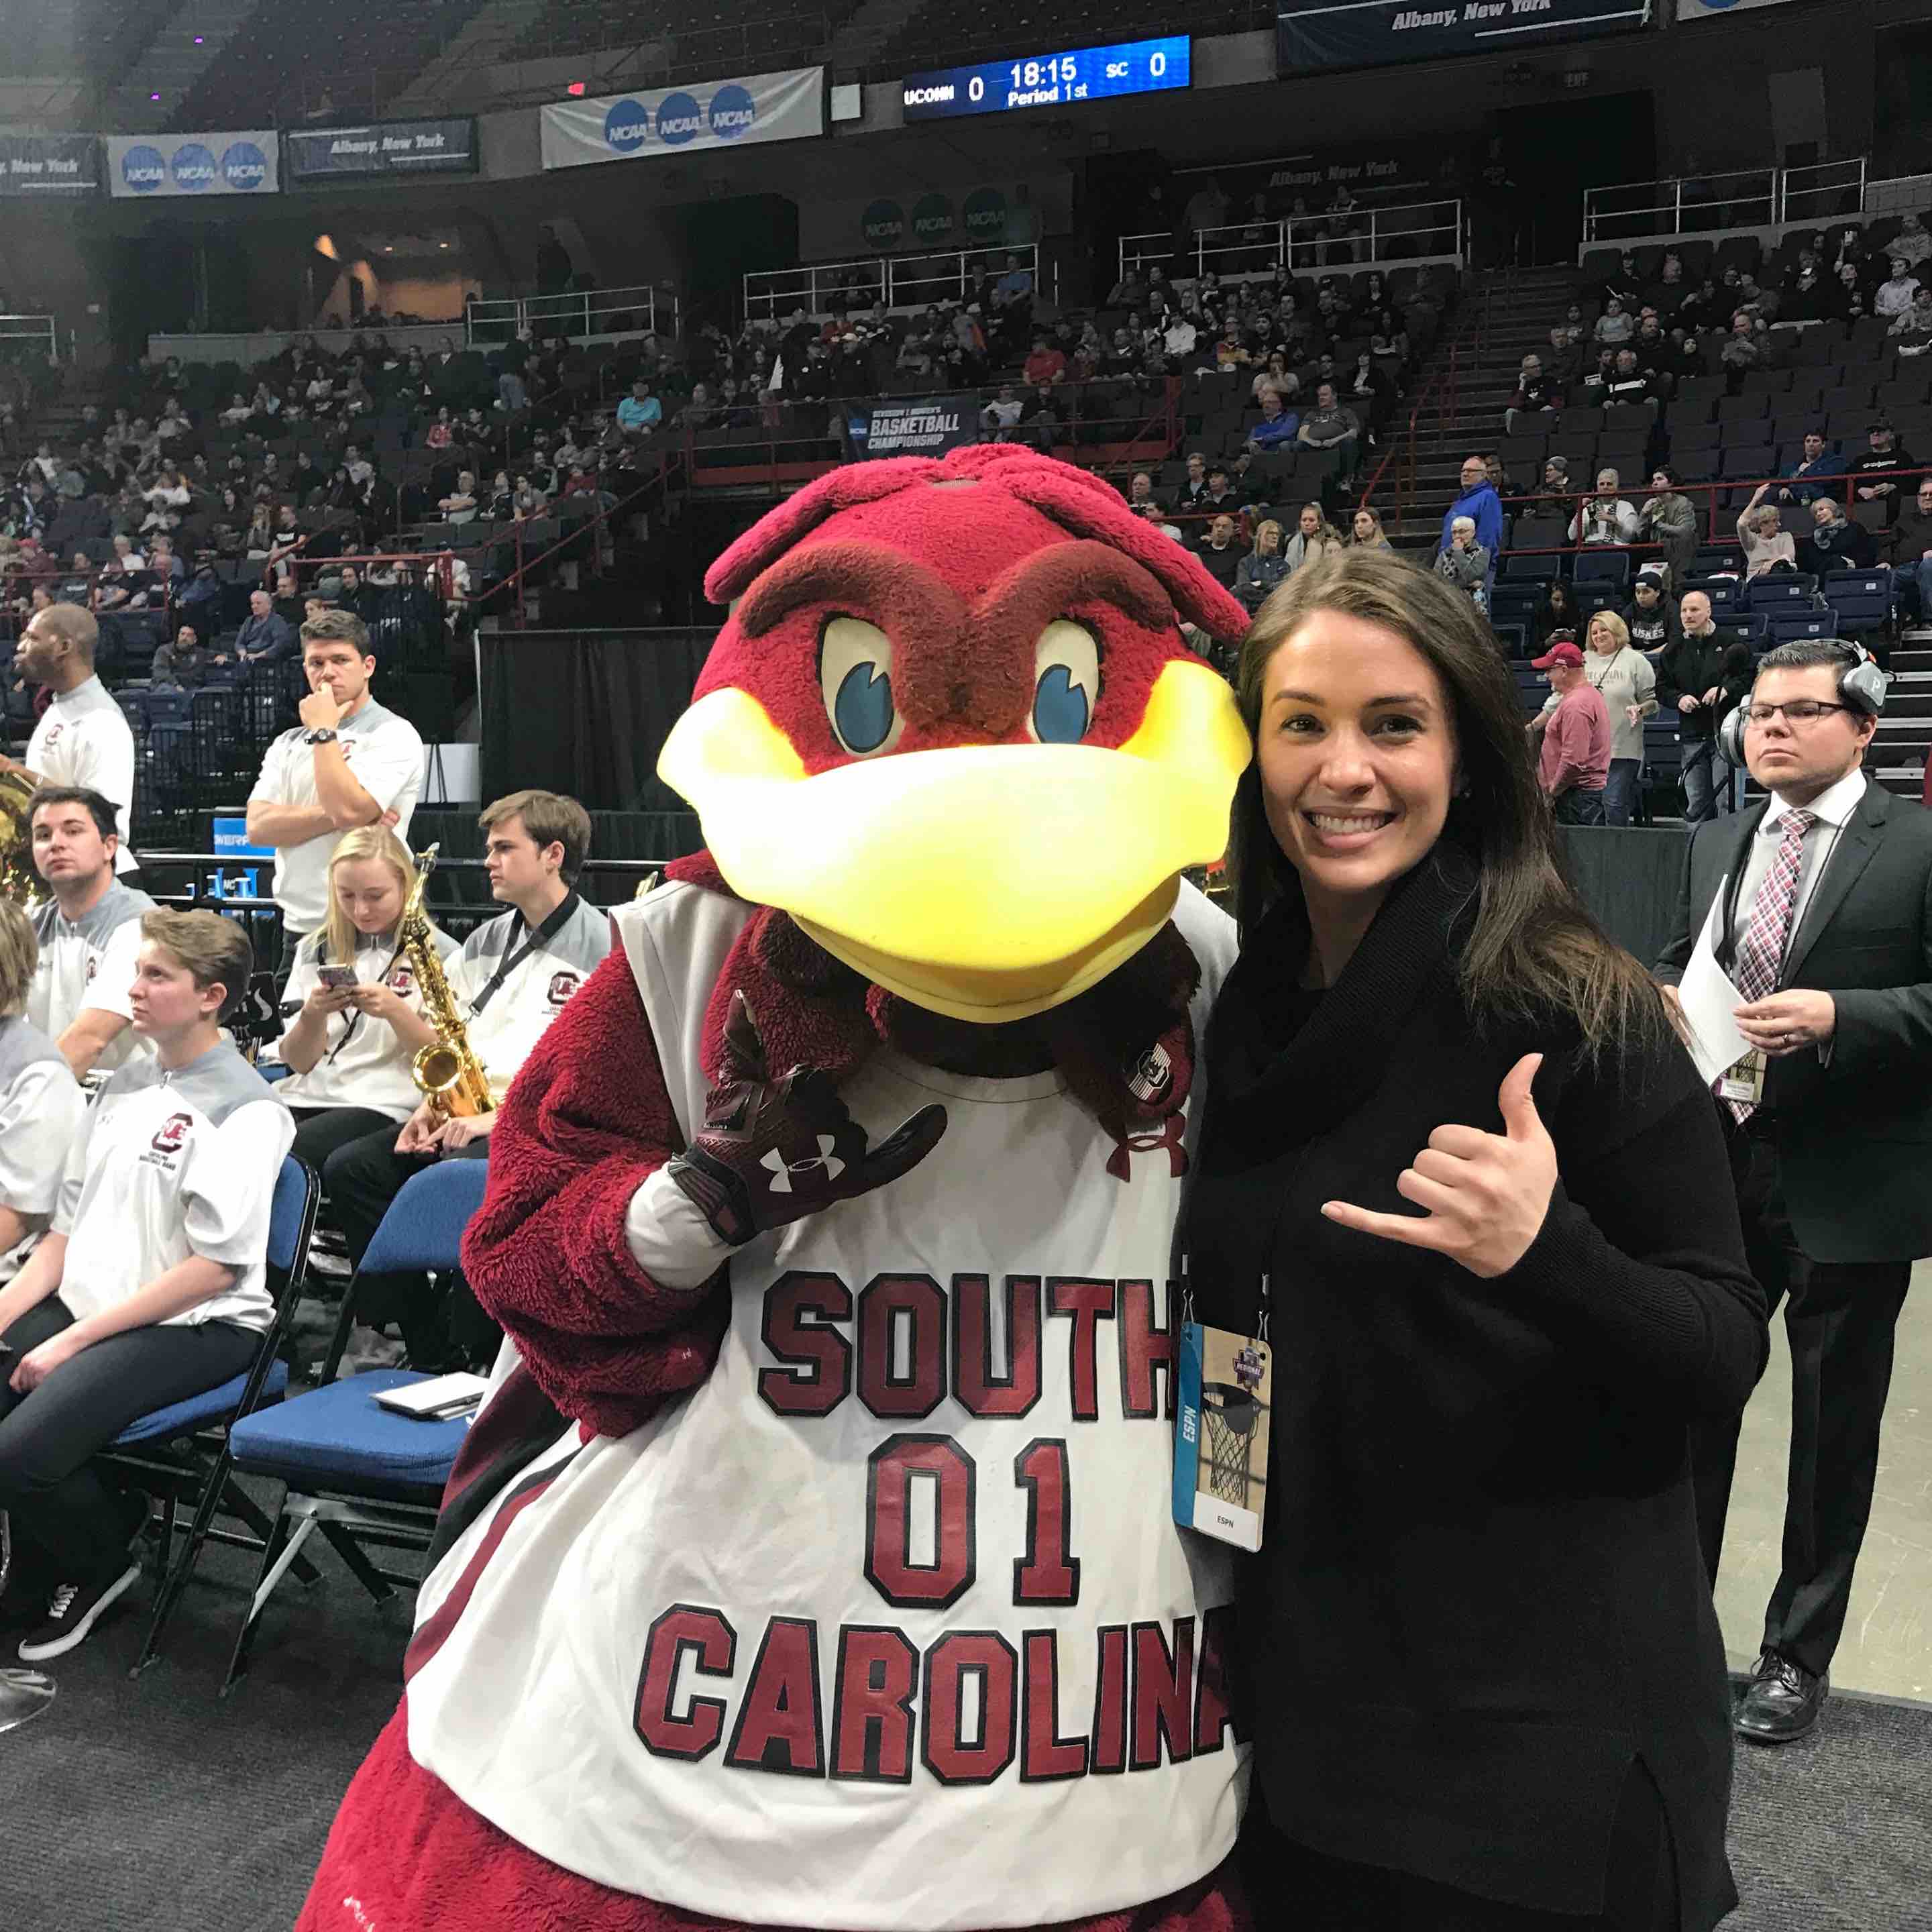 PR graduate and ESPN senior publicist Kimberly Elchlepp with cocky